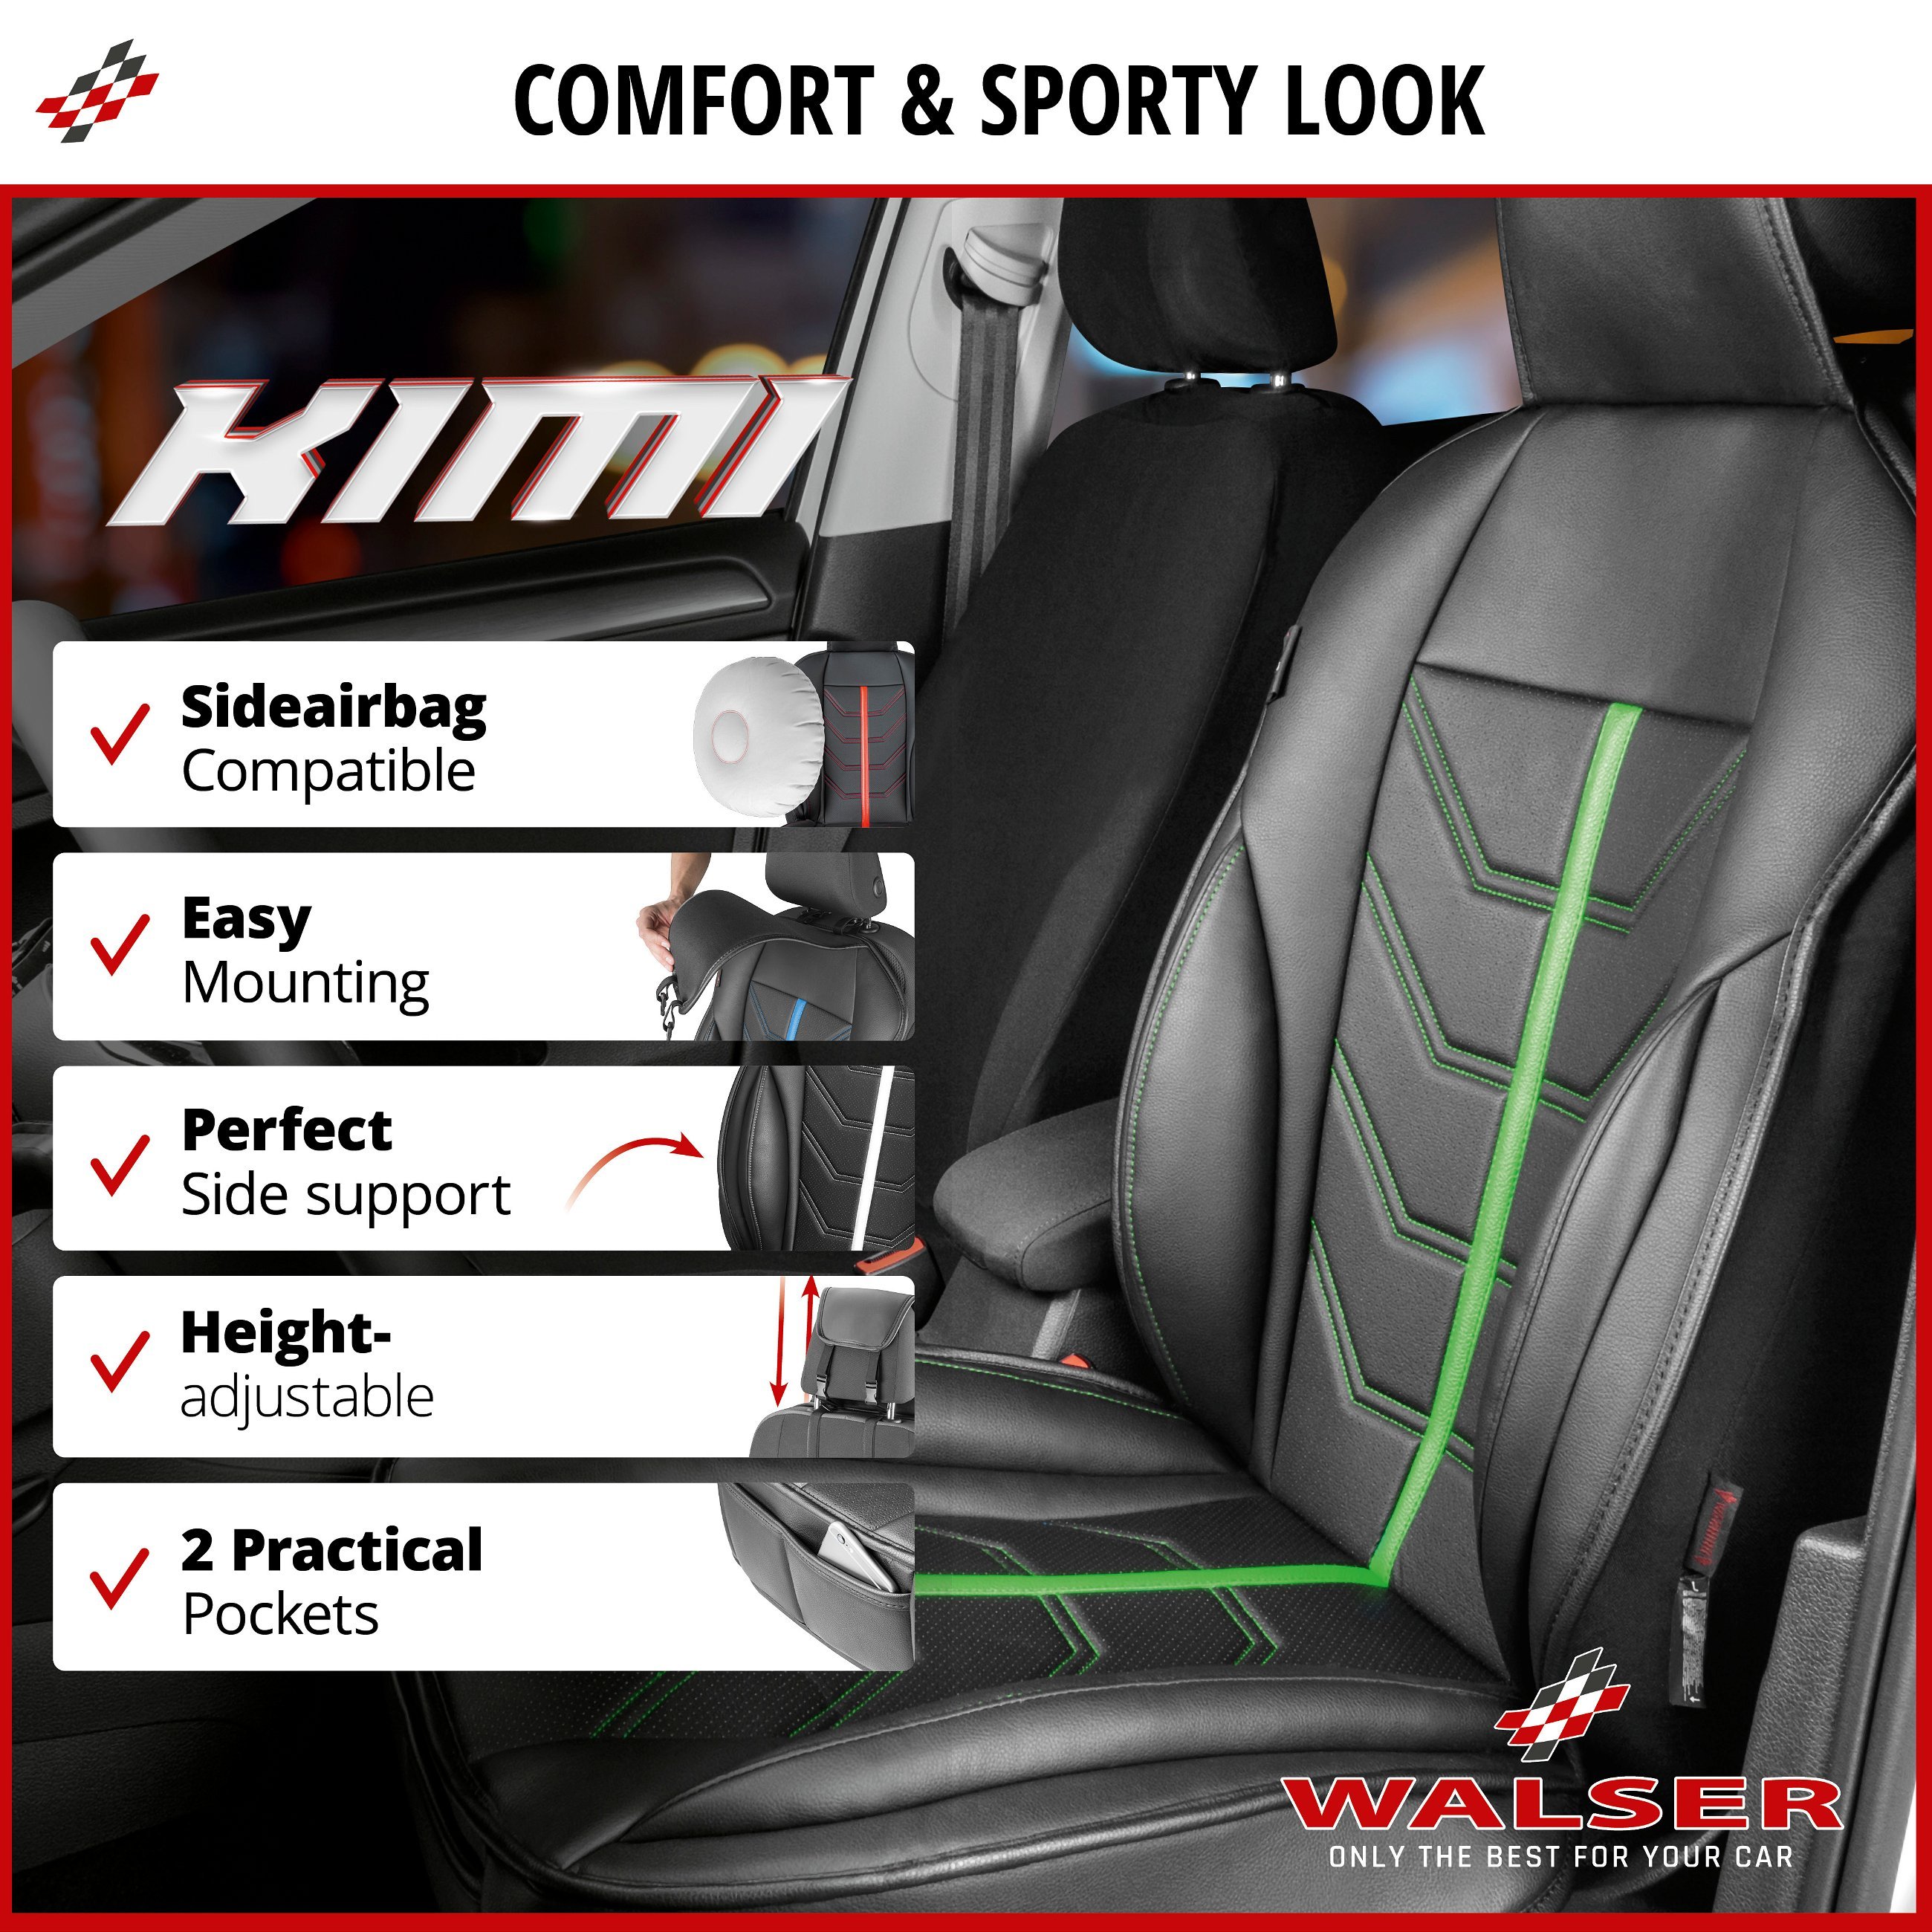 Car Seat cover Kimi, seat protector for cars in racing look black/green